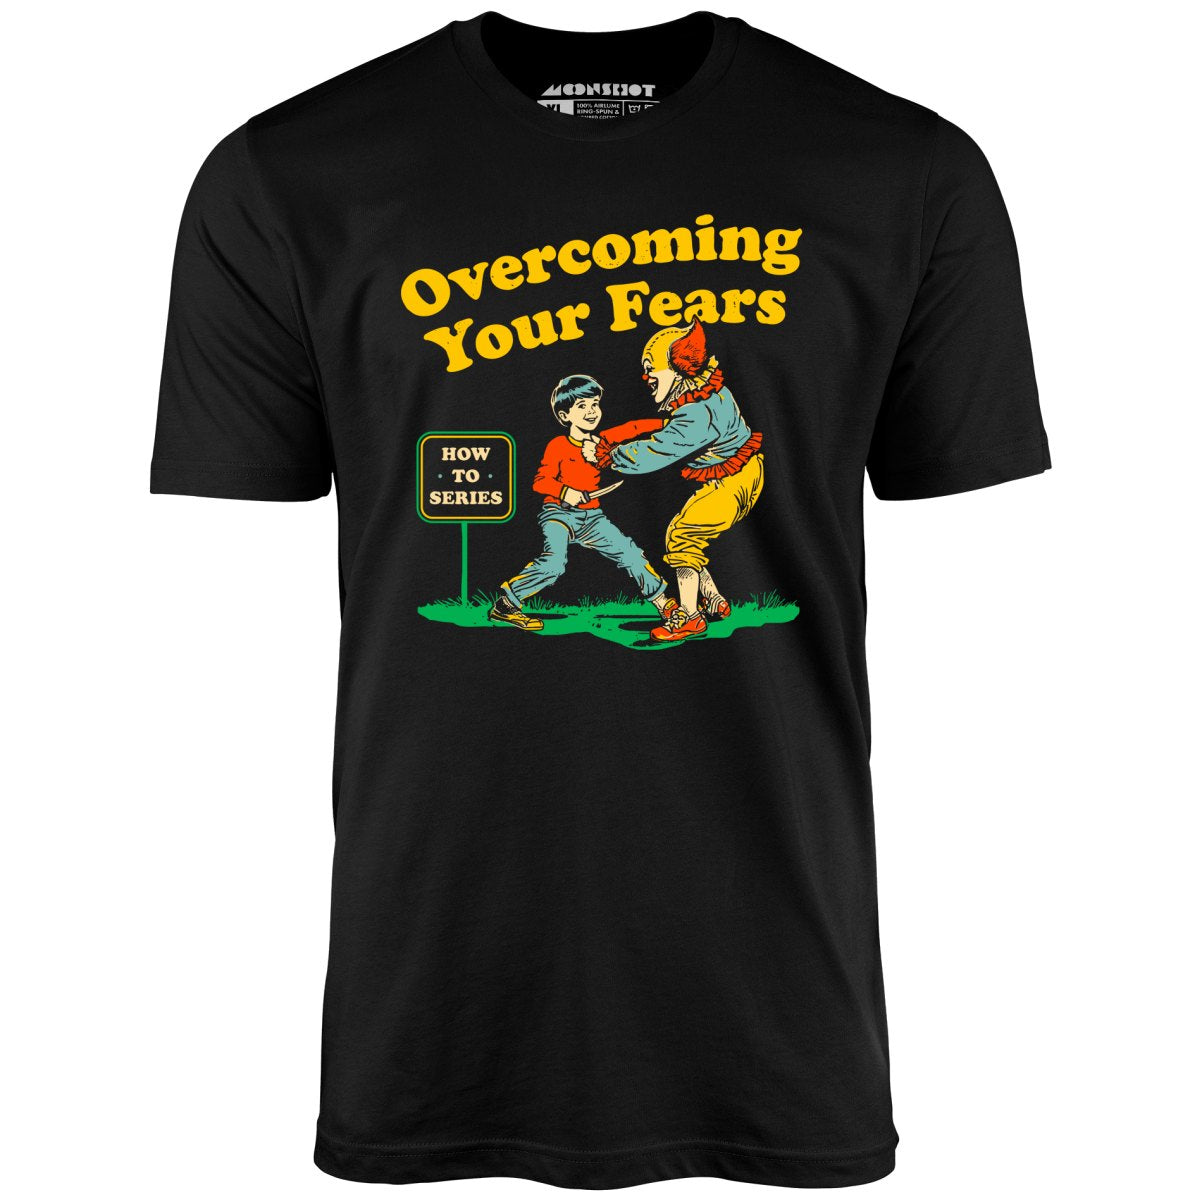 Overcoming Your Fears - Unisex T-Shirt